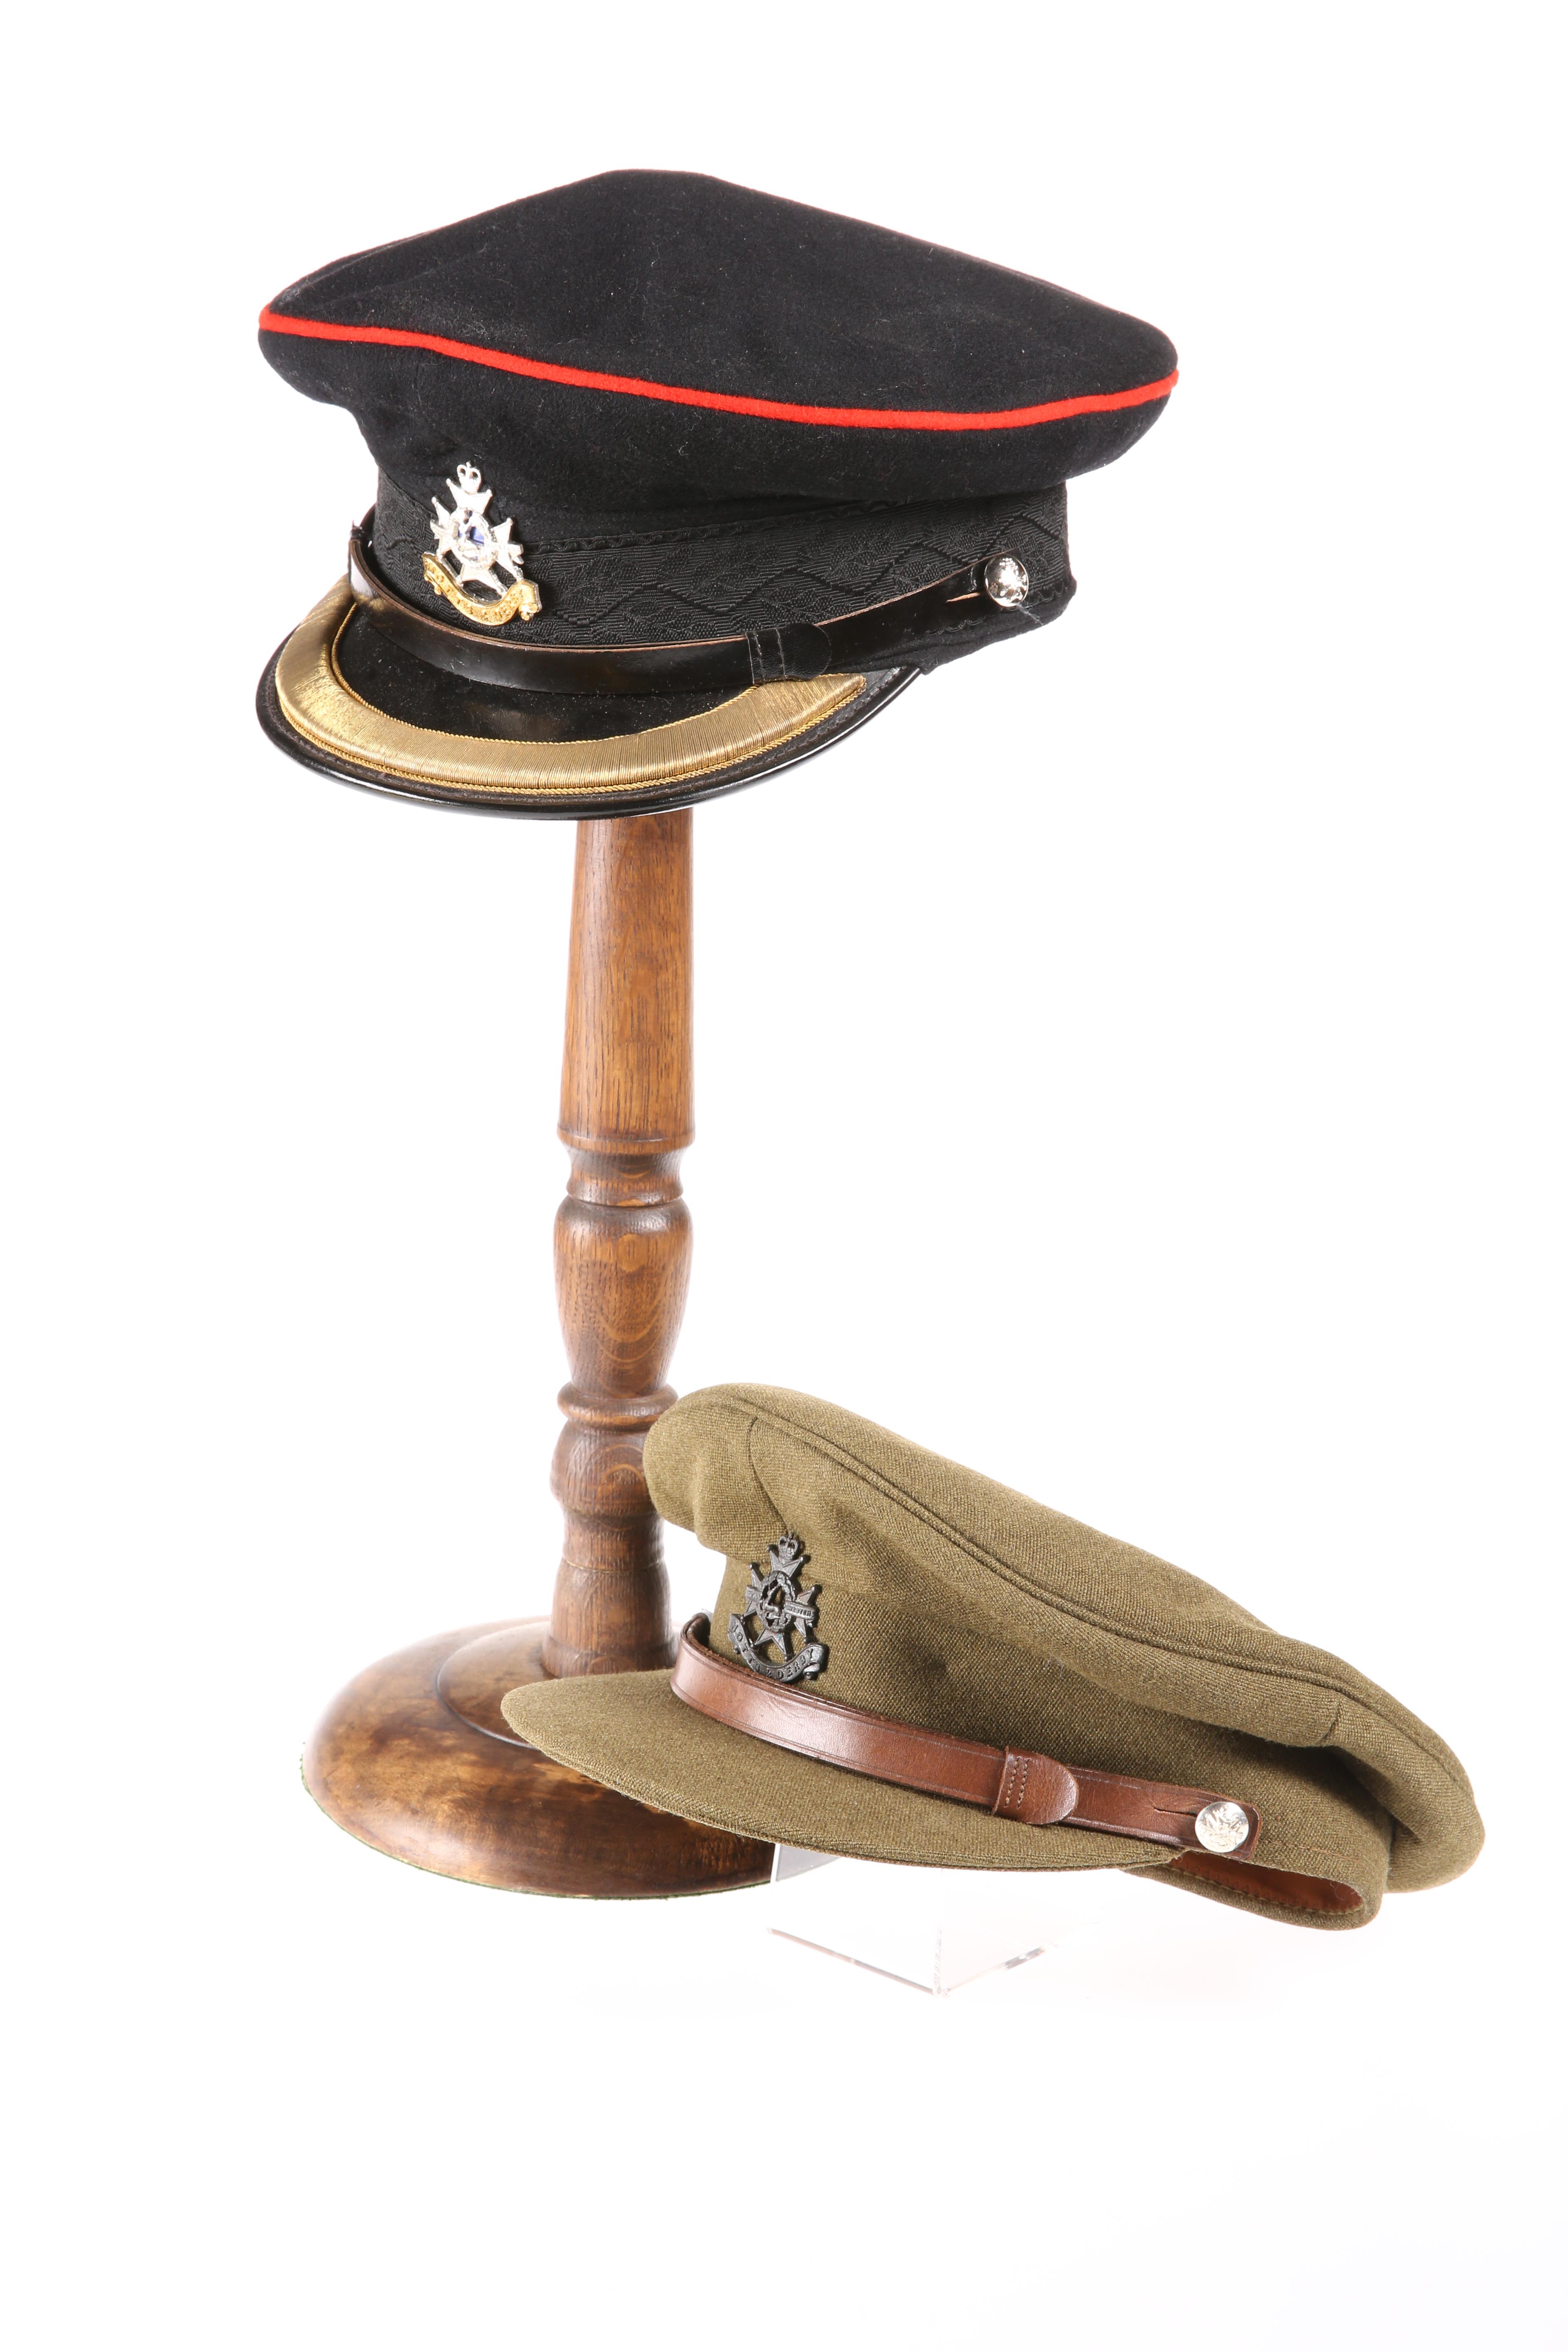 TWO POST-1952 FIELD OFFICERS' PATTERN PEAKED CAPS